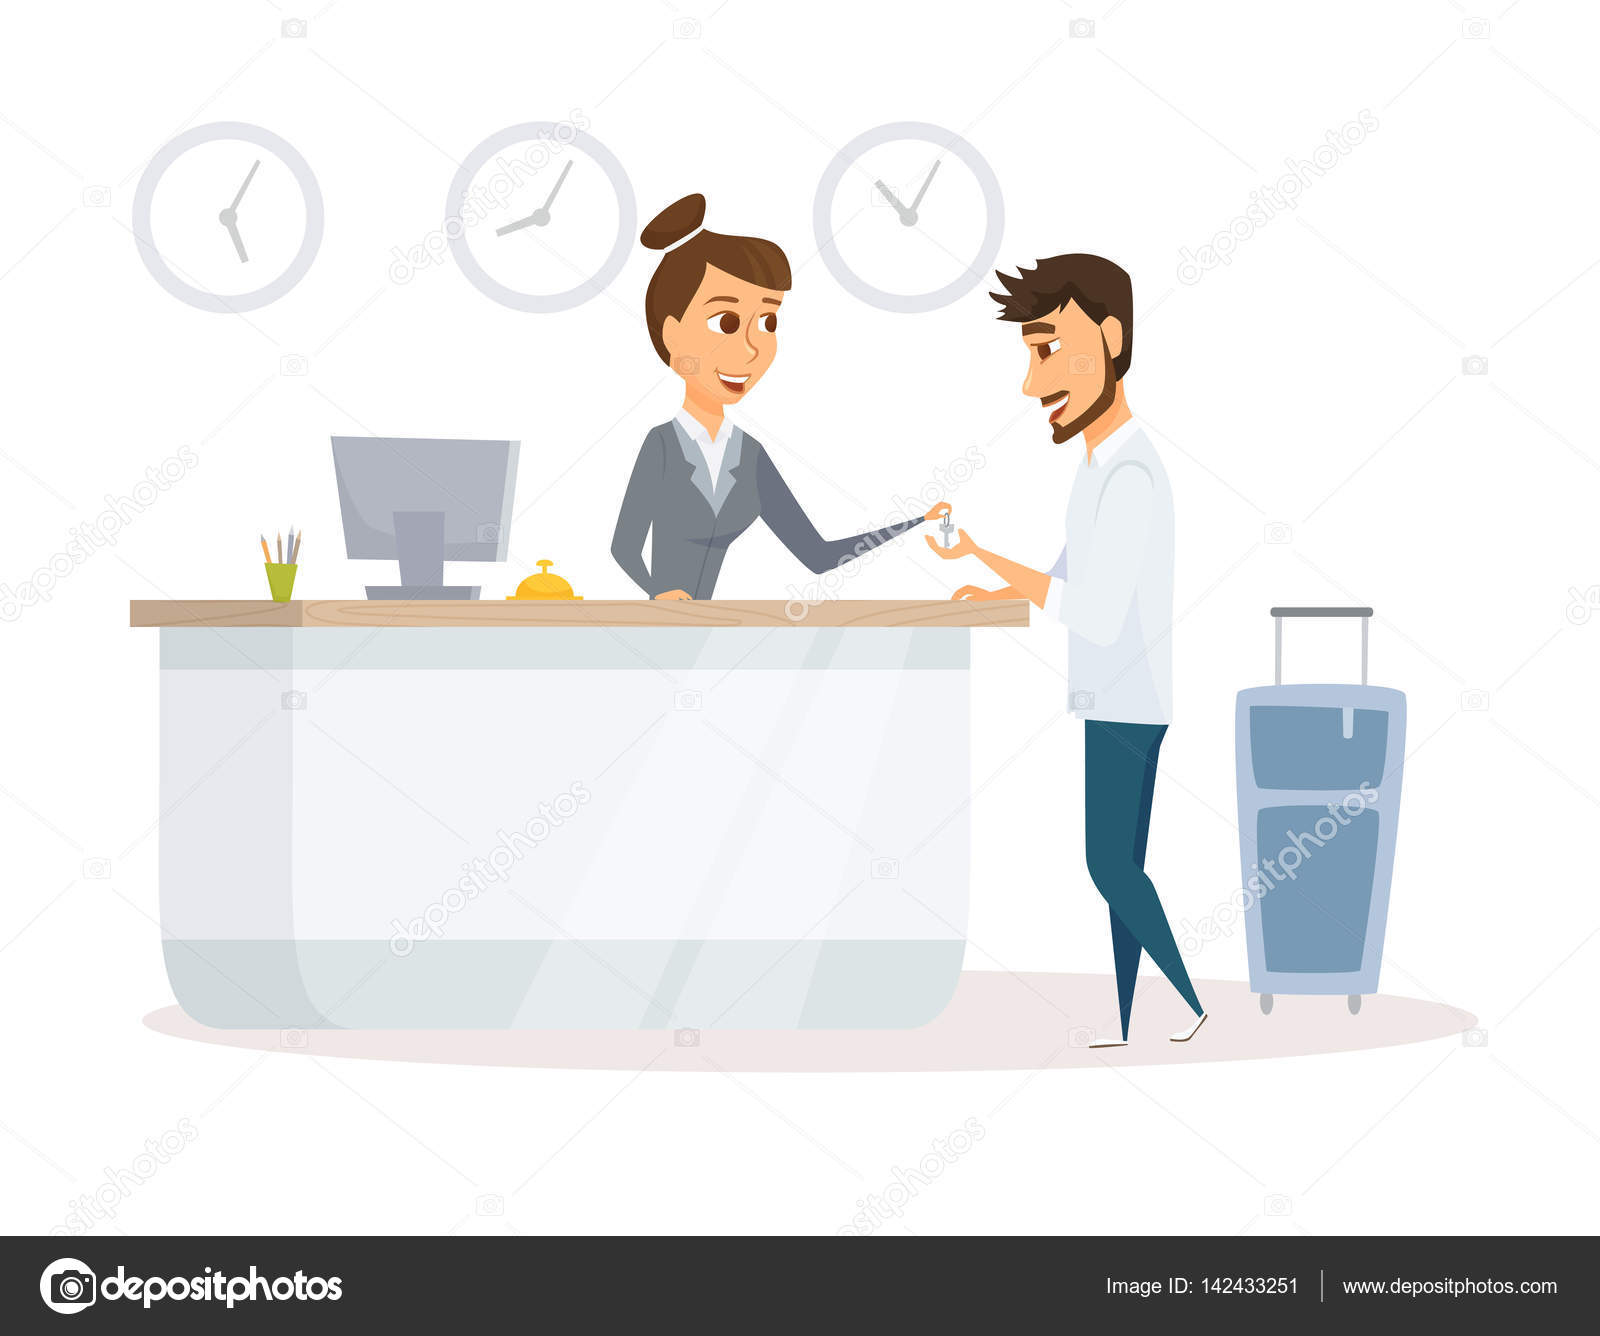 depositphotos_142433251 stock illustration receptionist and guest